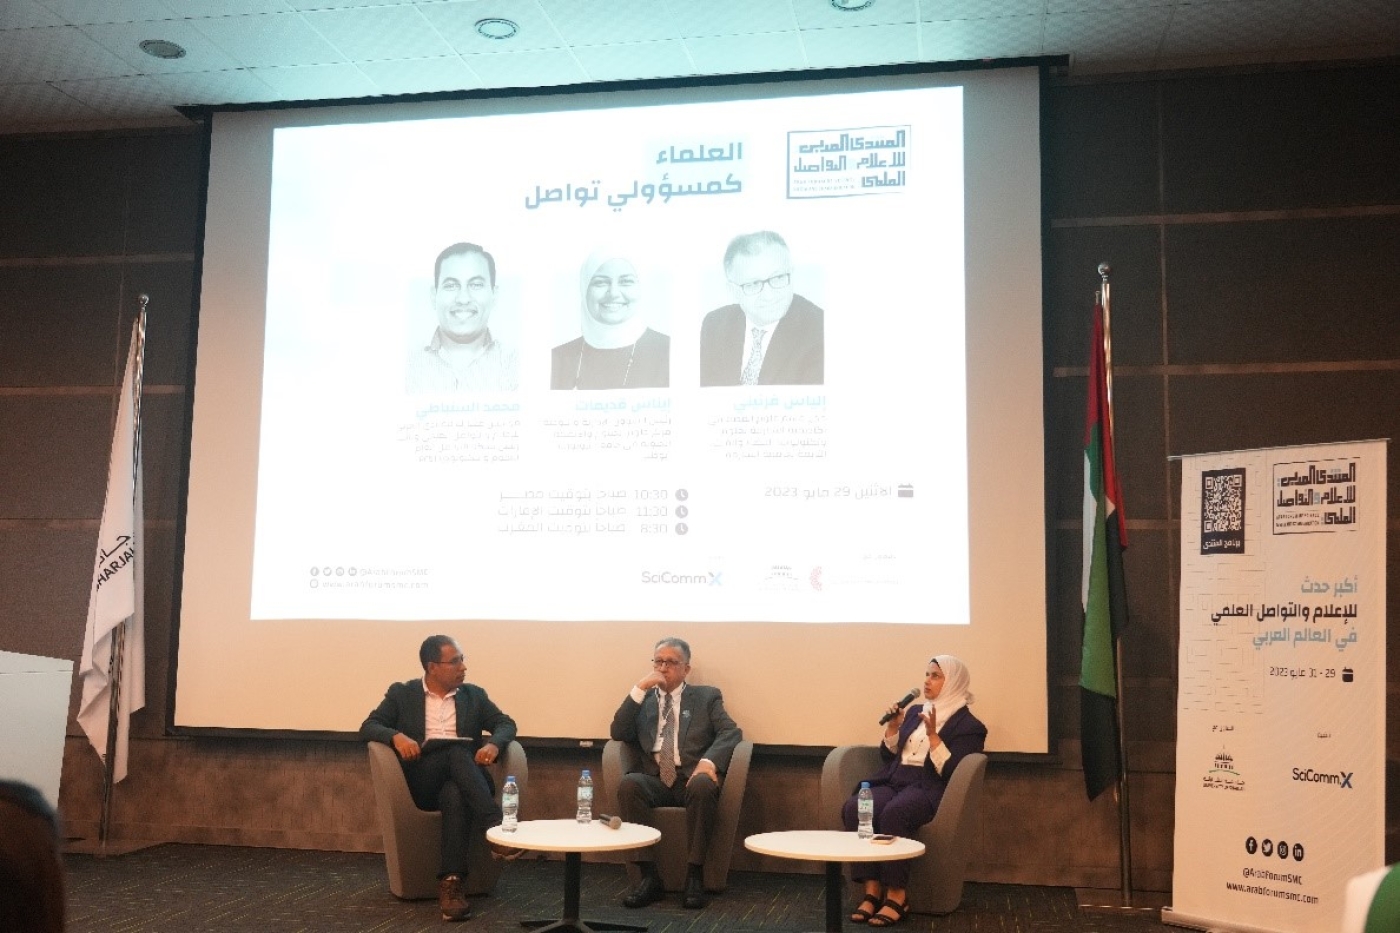 SAASST Participates in the 3rd Annual Arab Forum for Science and Media Communication